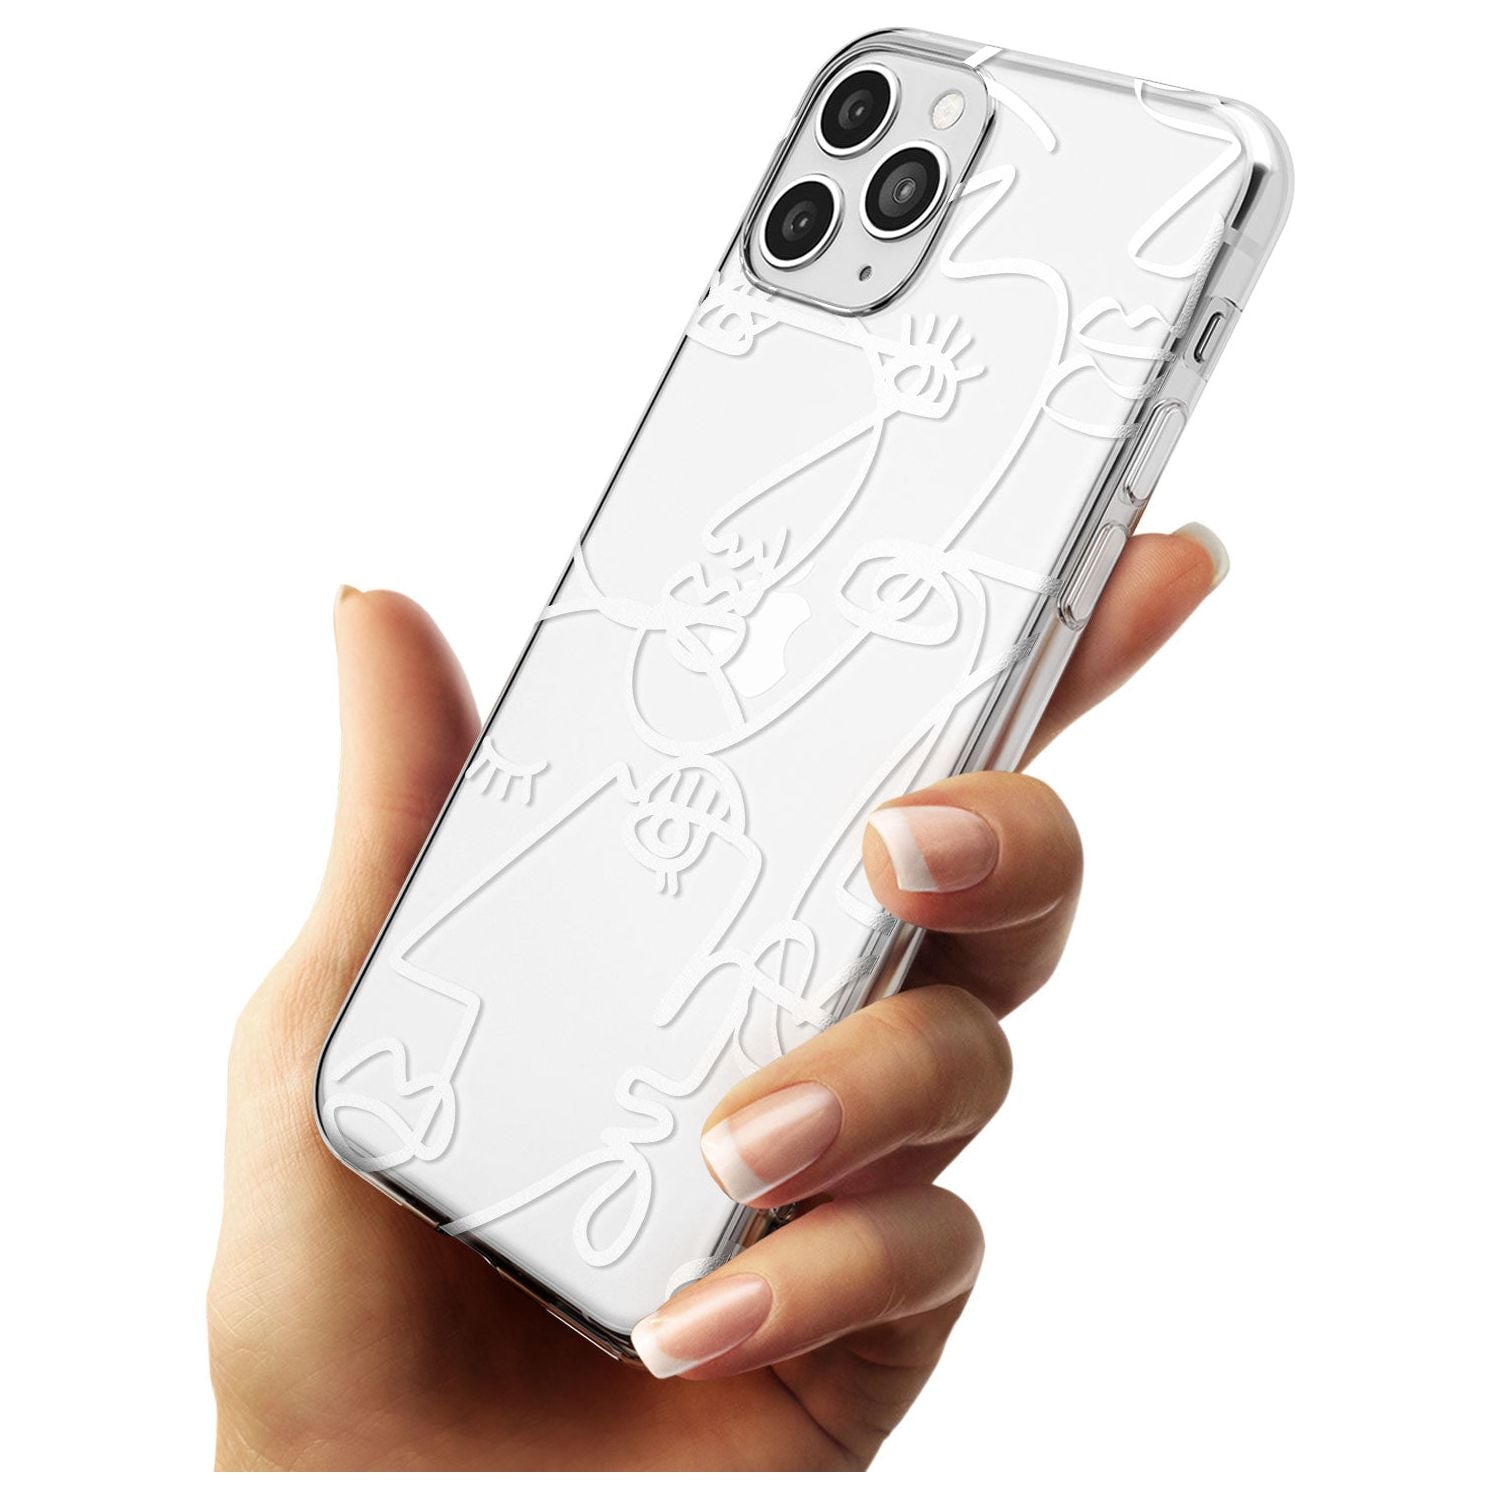 Continuous Line Faces: White on Clear Black Impact Phone Case for iPhone 11 Pro Max